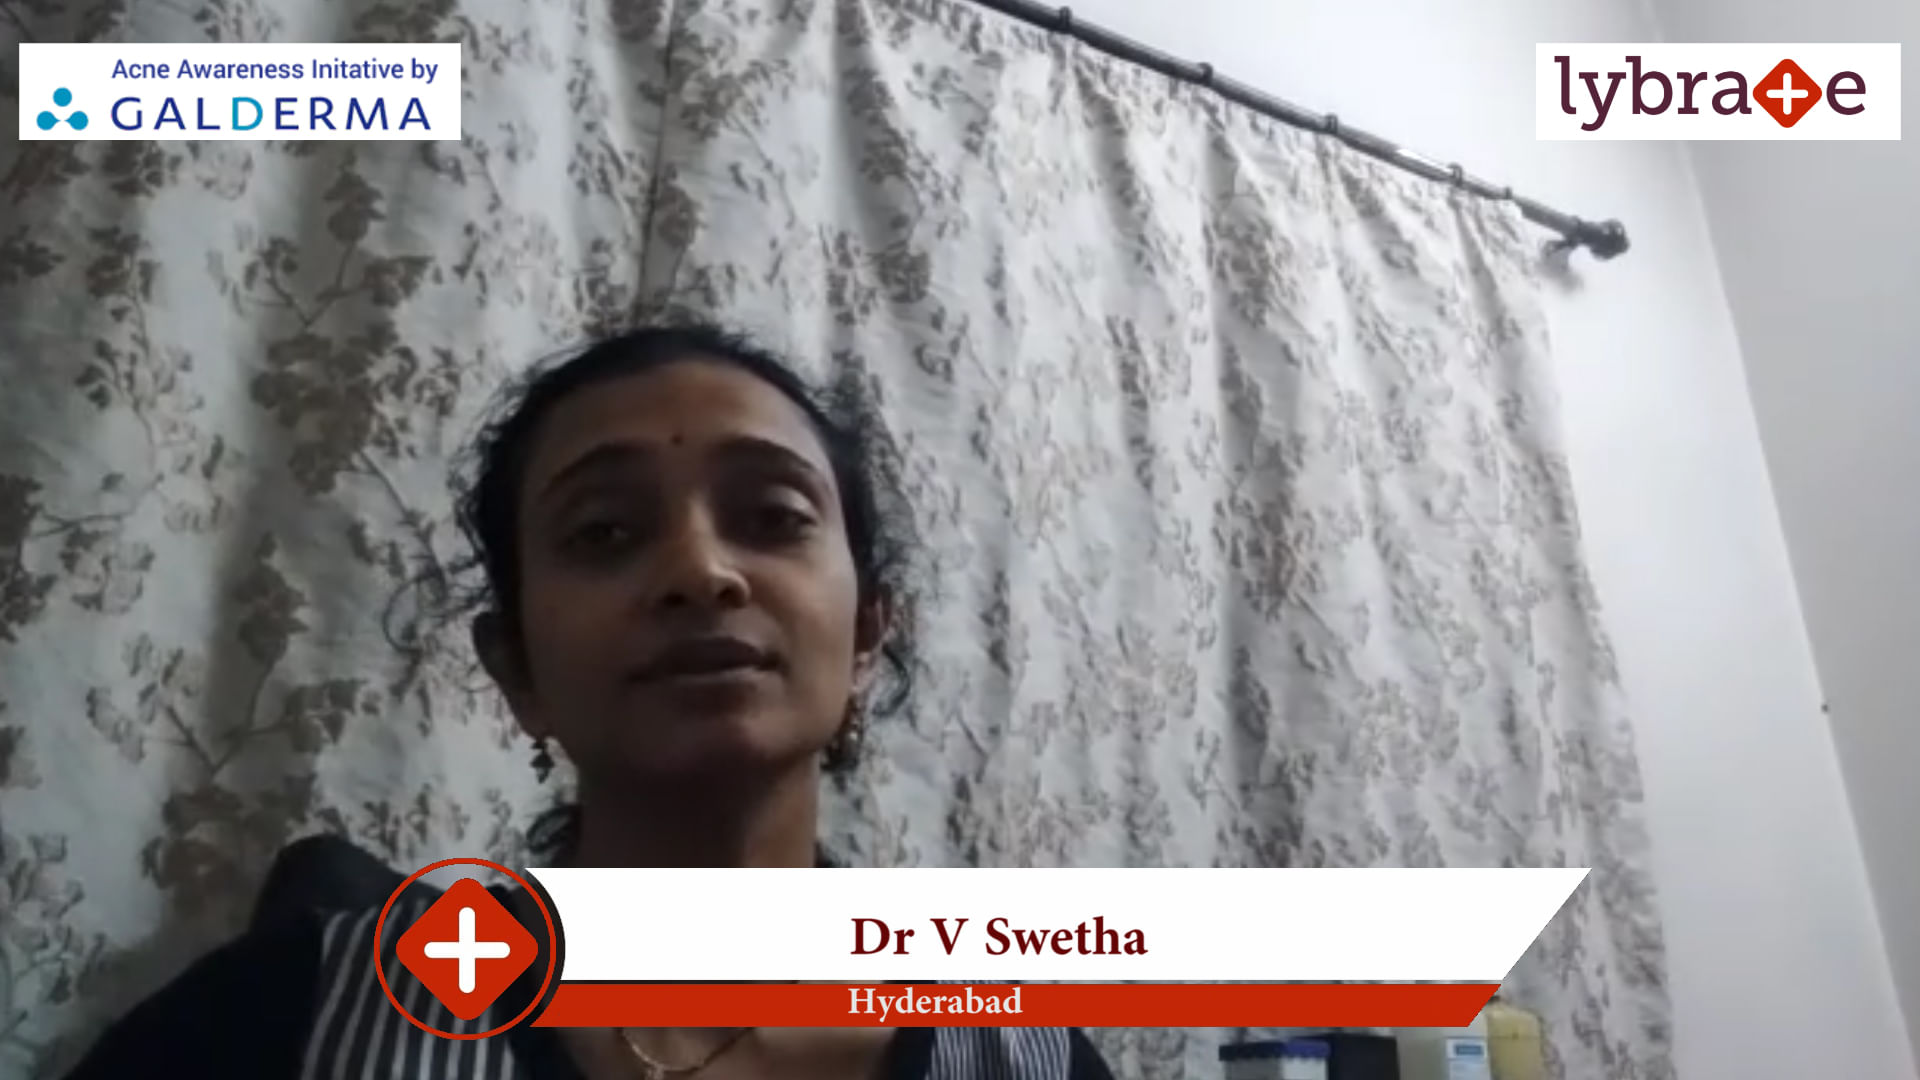 Lybrate | Dr. V Swetha speaks on IMPORTANCE OF TREATING ACNE EARLY